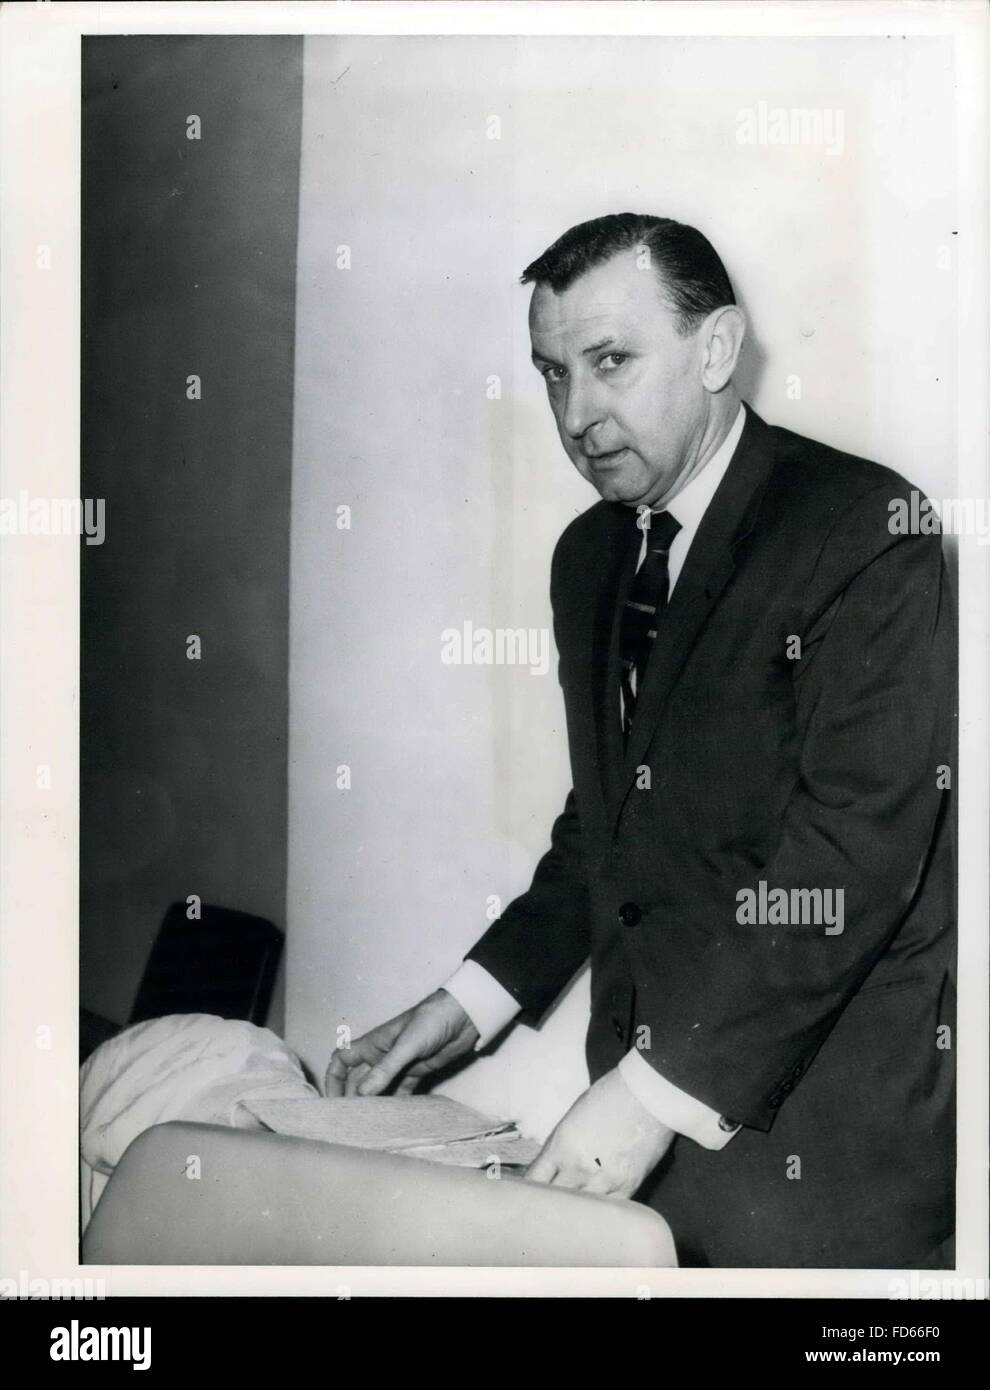 1968 - John Allen Kuchard de Cerna, who is a defendant in Munich, claims to be a secret service agent of the US. The public prosecutor claims he is Jan Alois Kuchler from Czechoslovakia, and wants to know if he is a swindler or really an agent. © Keystone Pictures USA/ZUMAPRESS.com/Alamy Live News Stock Photo